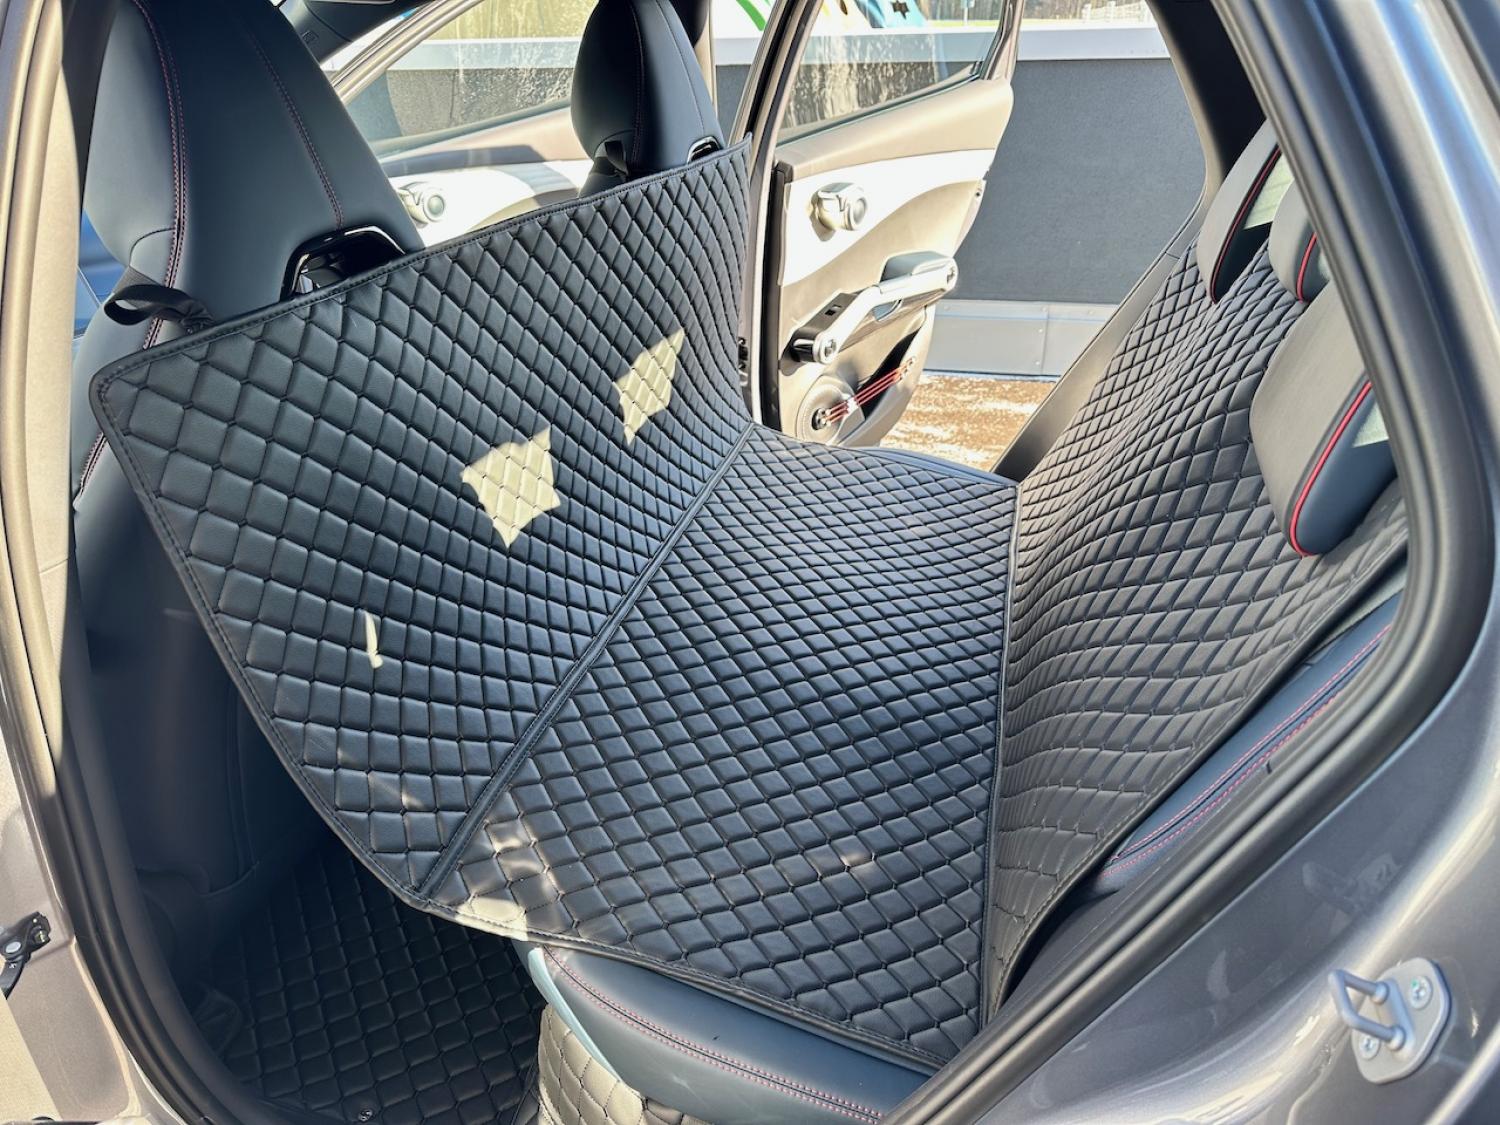 CARSTYLER® Back Seat Cover Geeignet Für Audi A5 8T Sportback 2009-2016